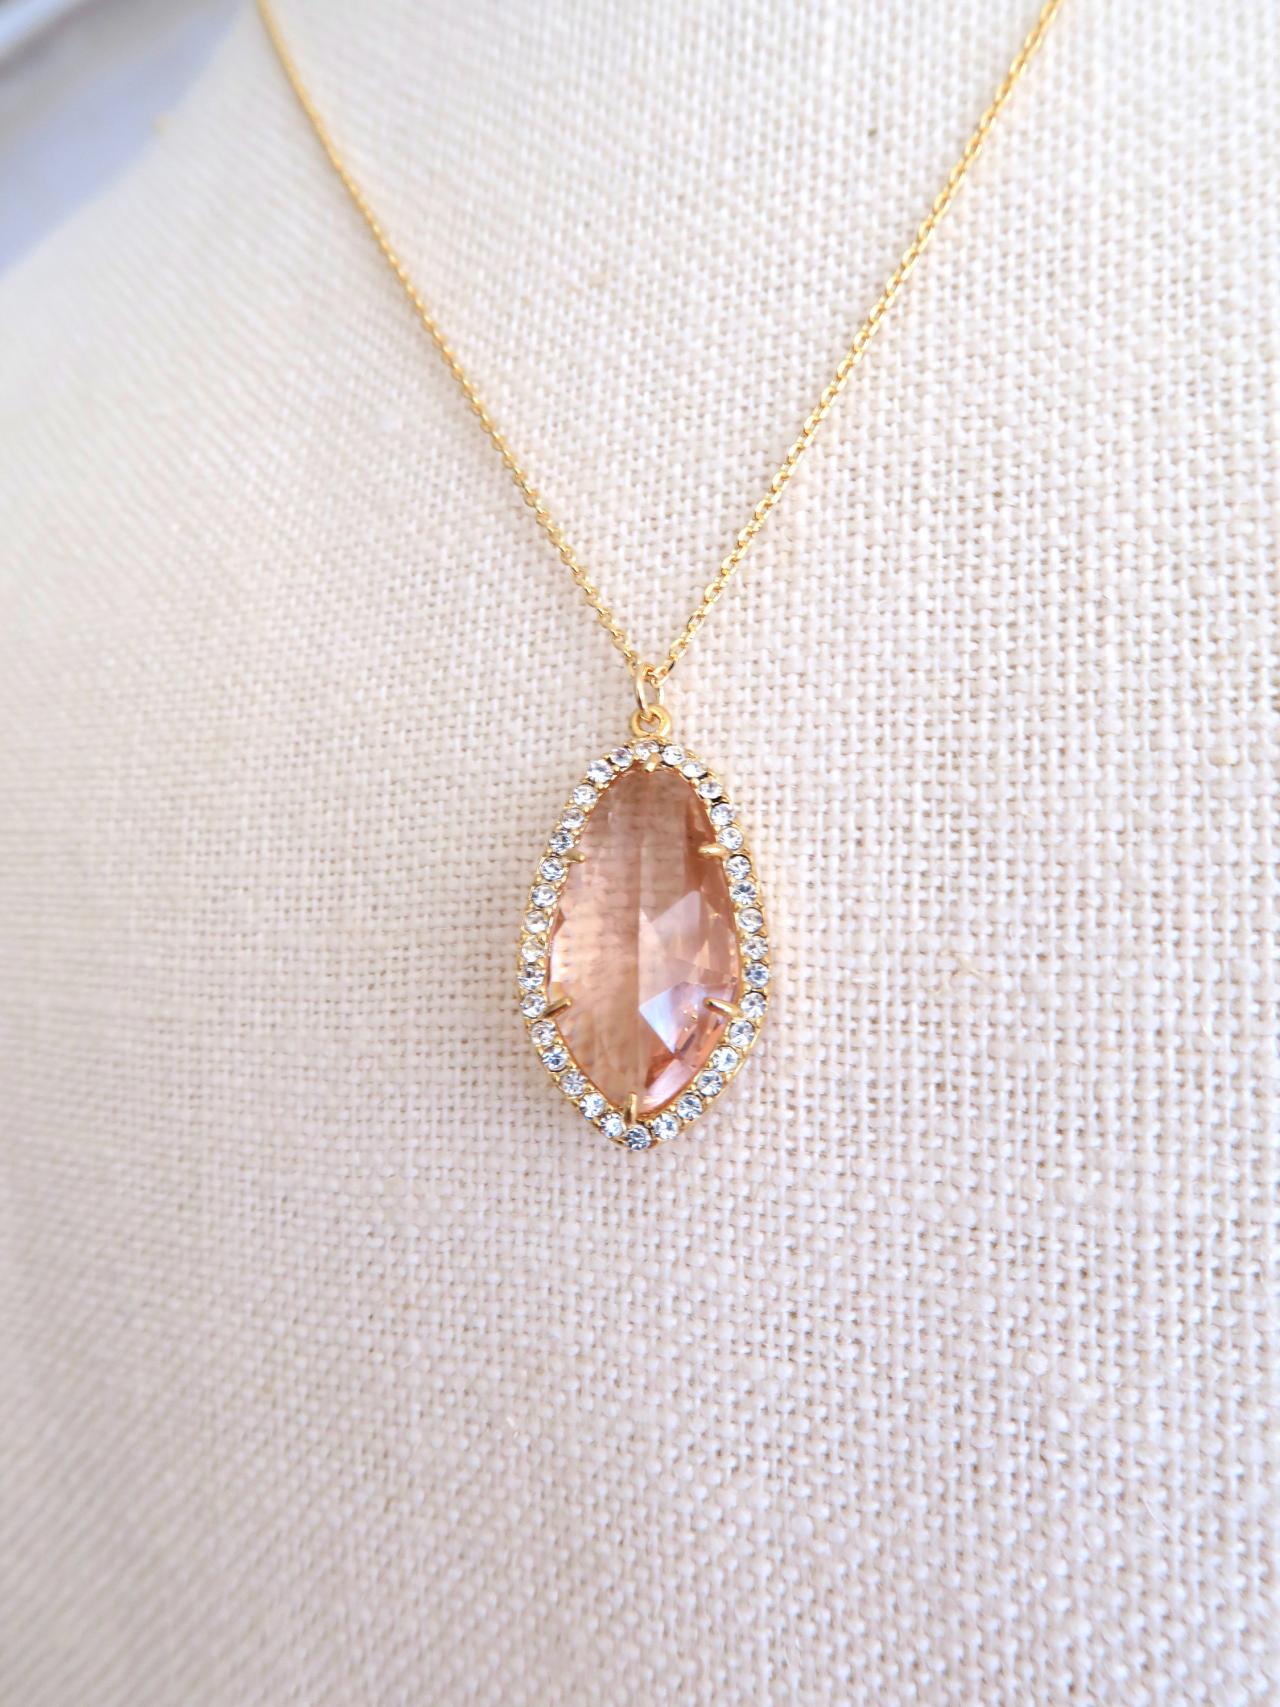 Champagne Peach Teardrop Necklace Crystal Charm Necklace Wedding Pendant Jewelry Bridal Necklace Bridesmaids Gift Birthday Gift (n013)